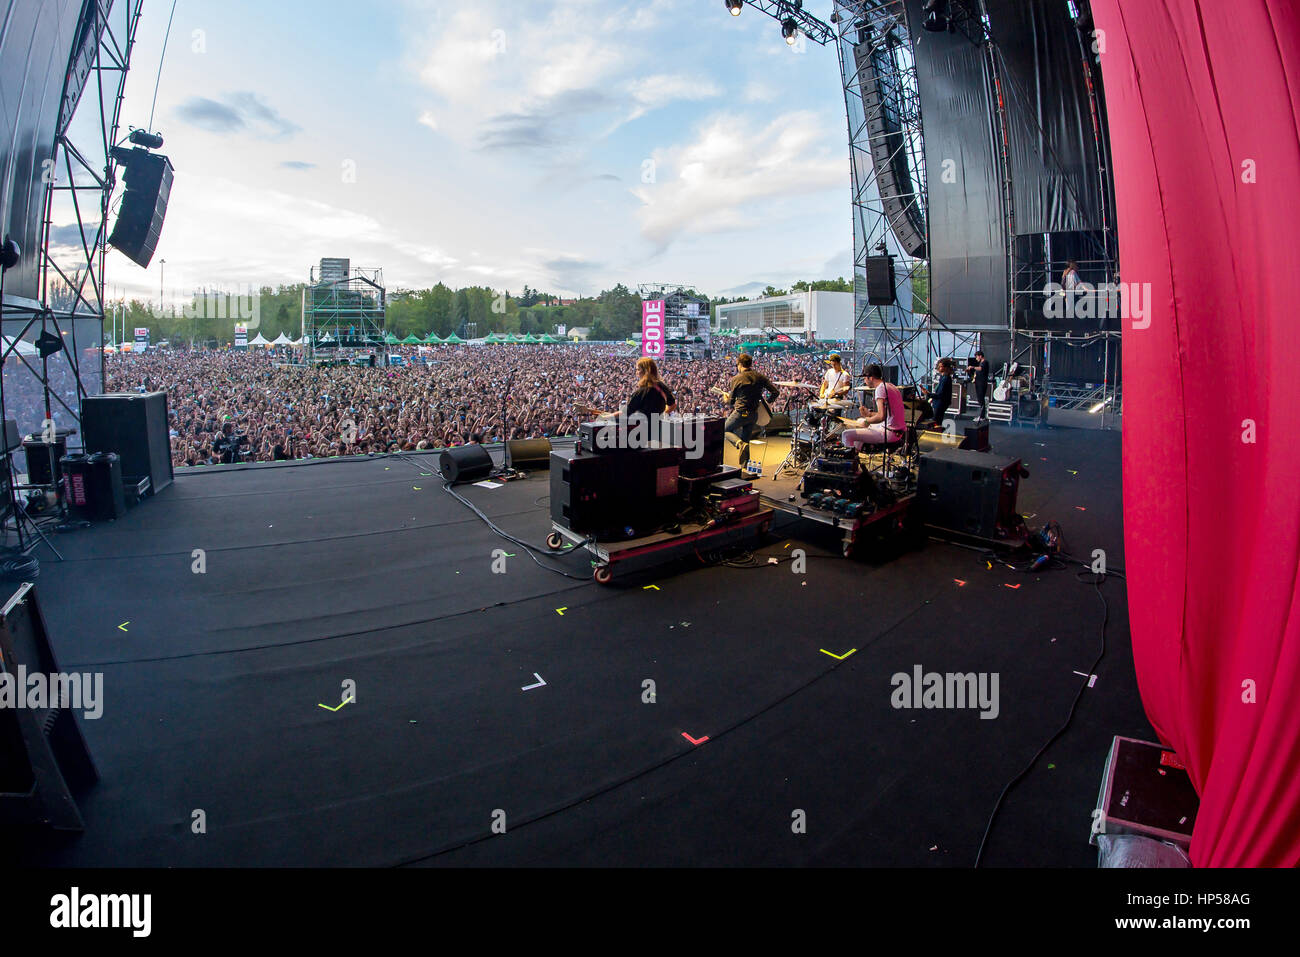 MADRID - SEP 12: The Vaccines (Band) in Konzert am Dcode Festival am 12. September 2015 in Madrid, Spanien. Stockfoto